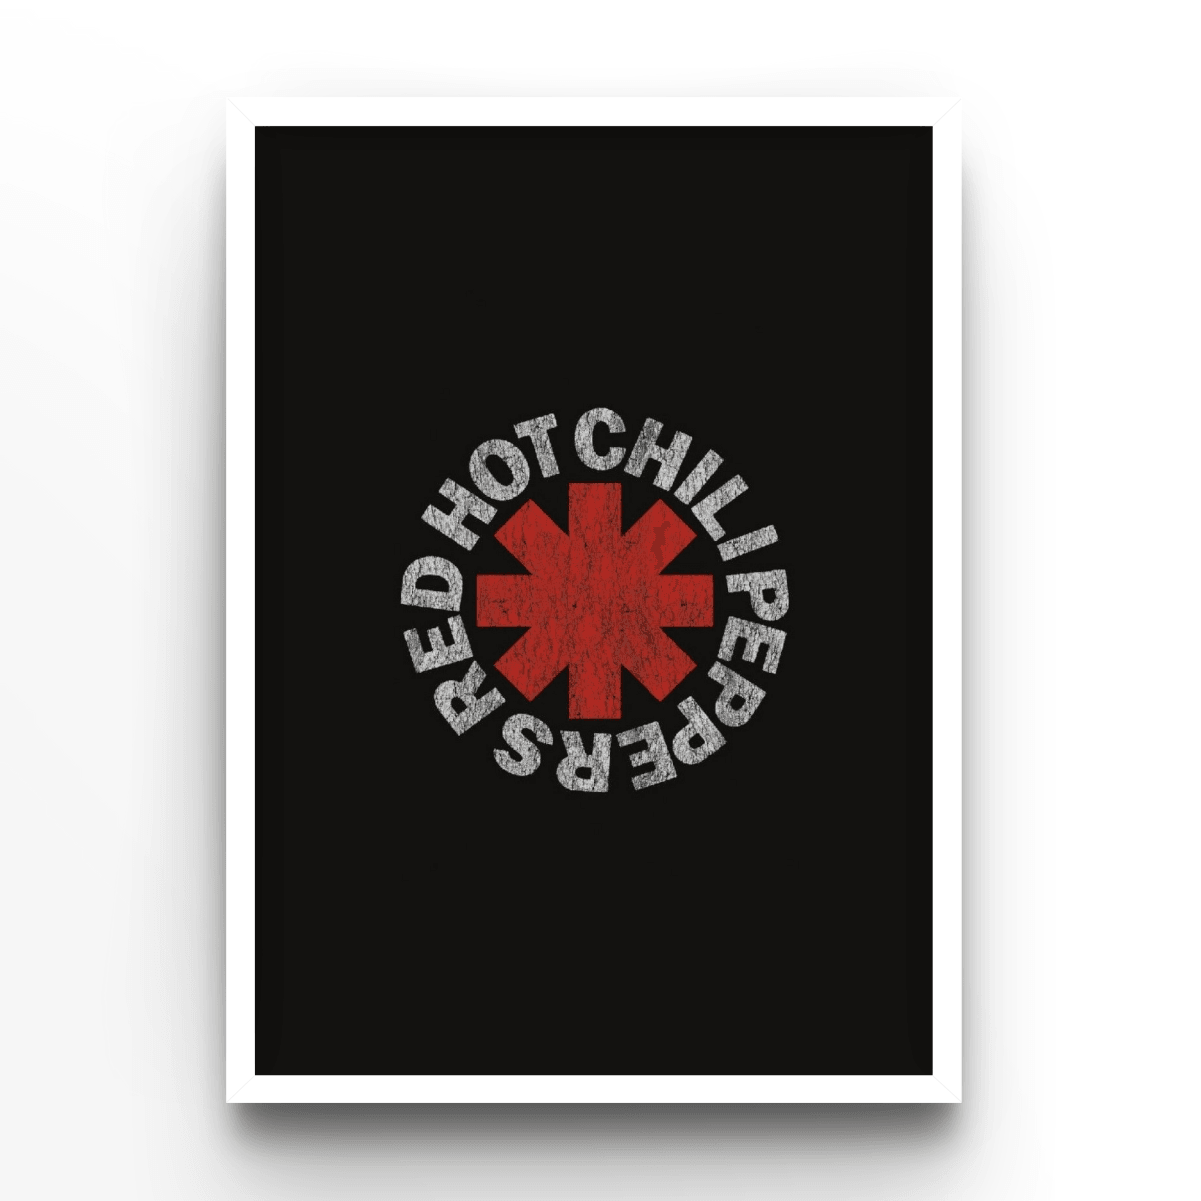 Red Hot Chili Peppers - A4, A3, A2 Posters Base - Poster Print Shop / Art Prints / PostersBase